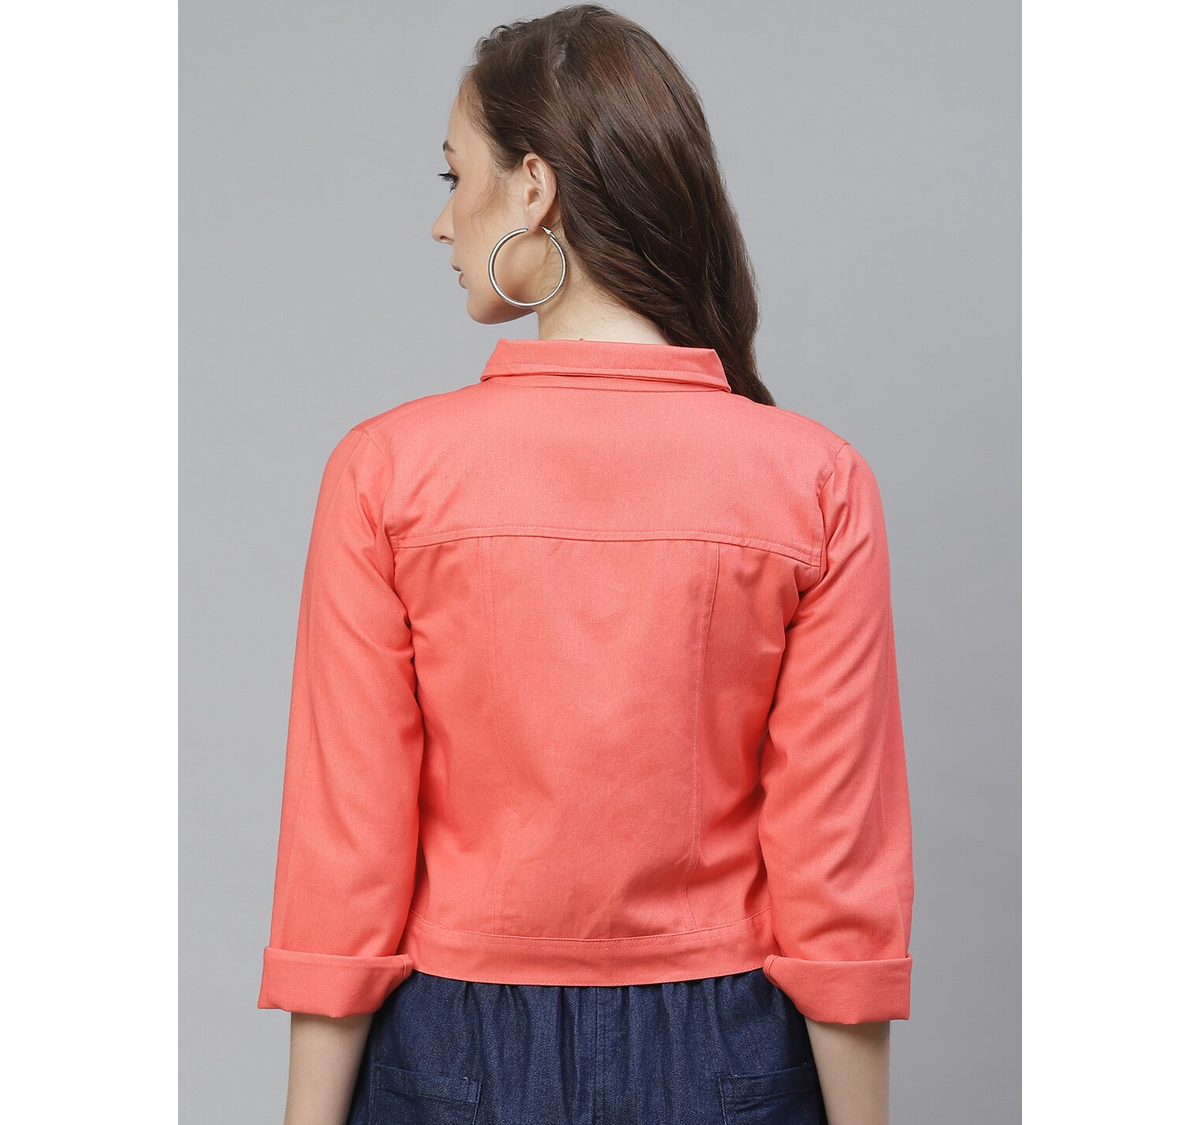 NEW DIMENSION 3/4th Sleeve Solid Women Denim Jacket - Buy NEW DIMENSION  3/4th Sleeve Solid Women Denim Jacket Online at Best Prices in India |  Flipkart.com